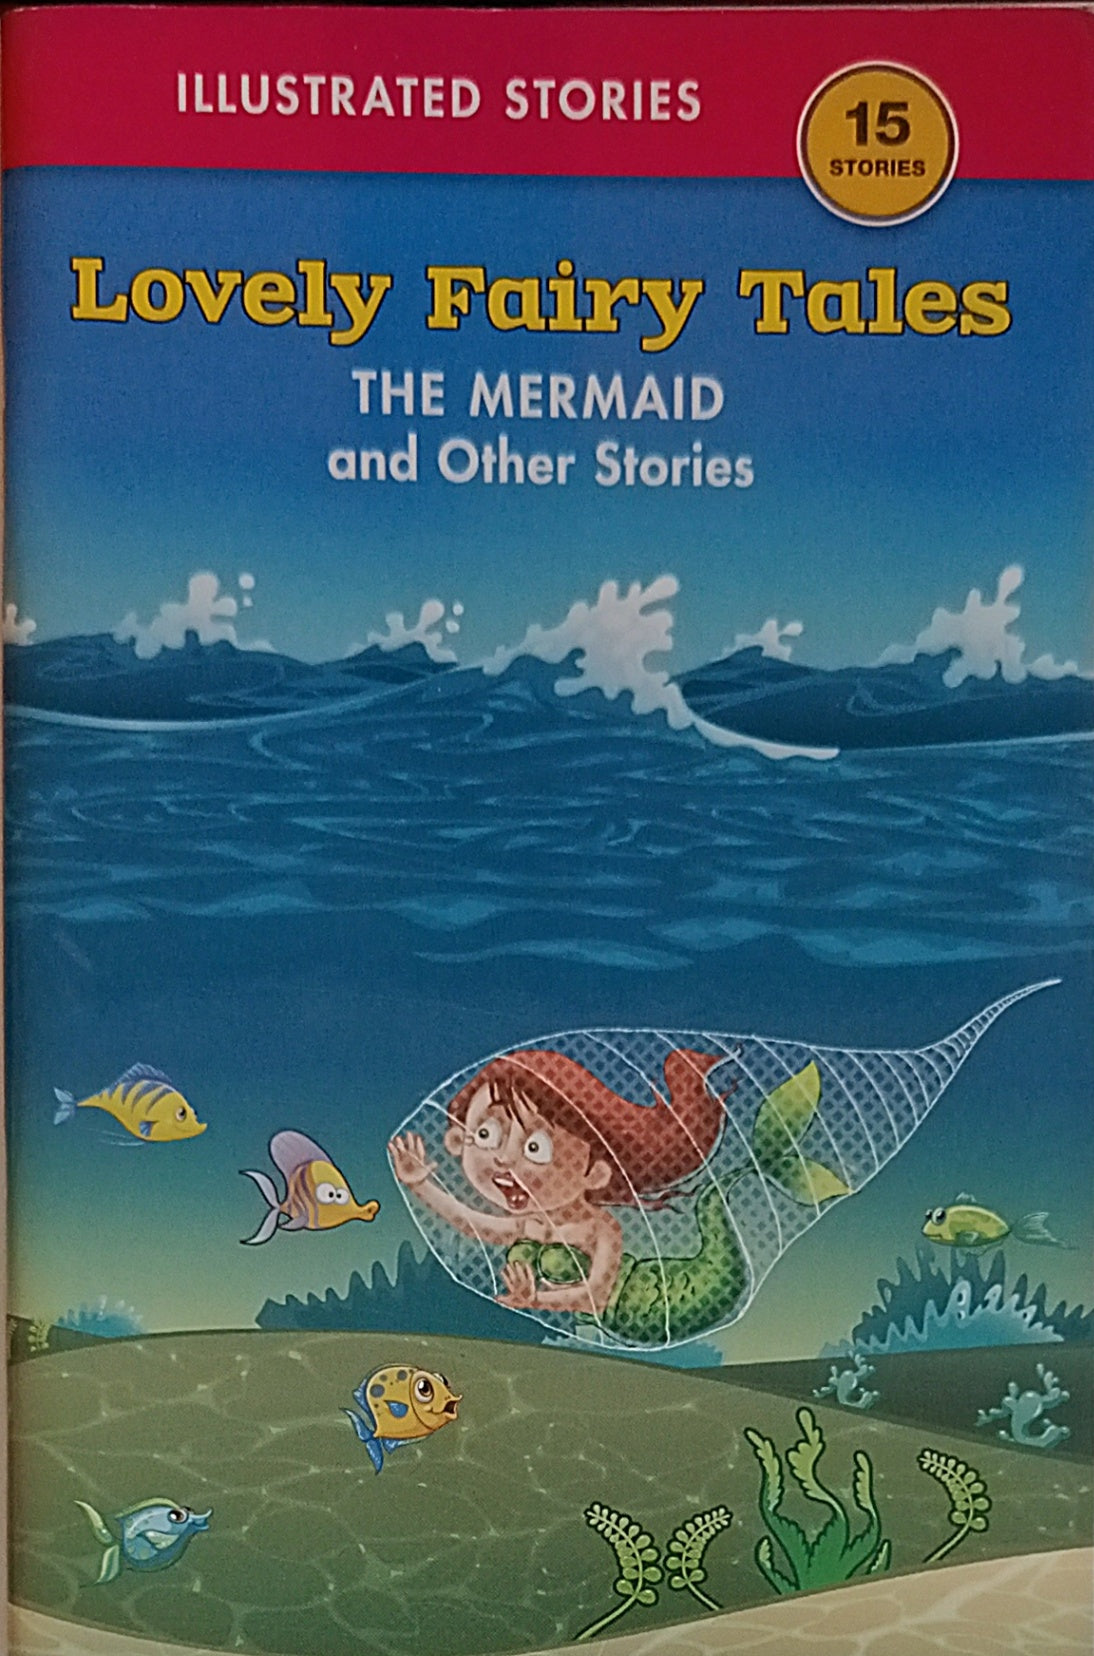 Lovely Fairy Tales The Mermaid and Other Stories